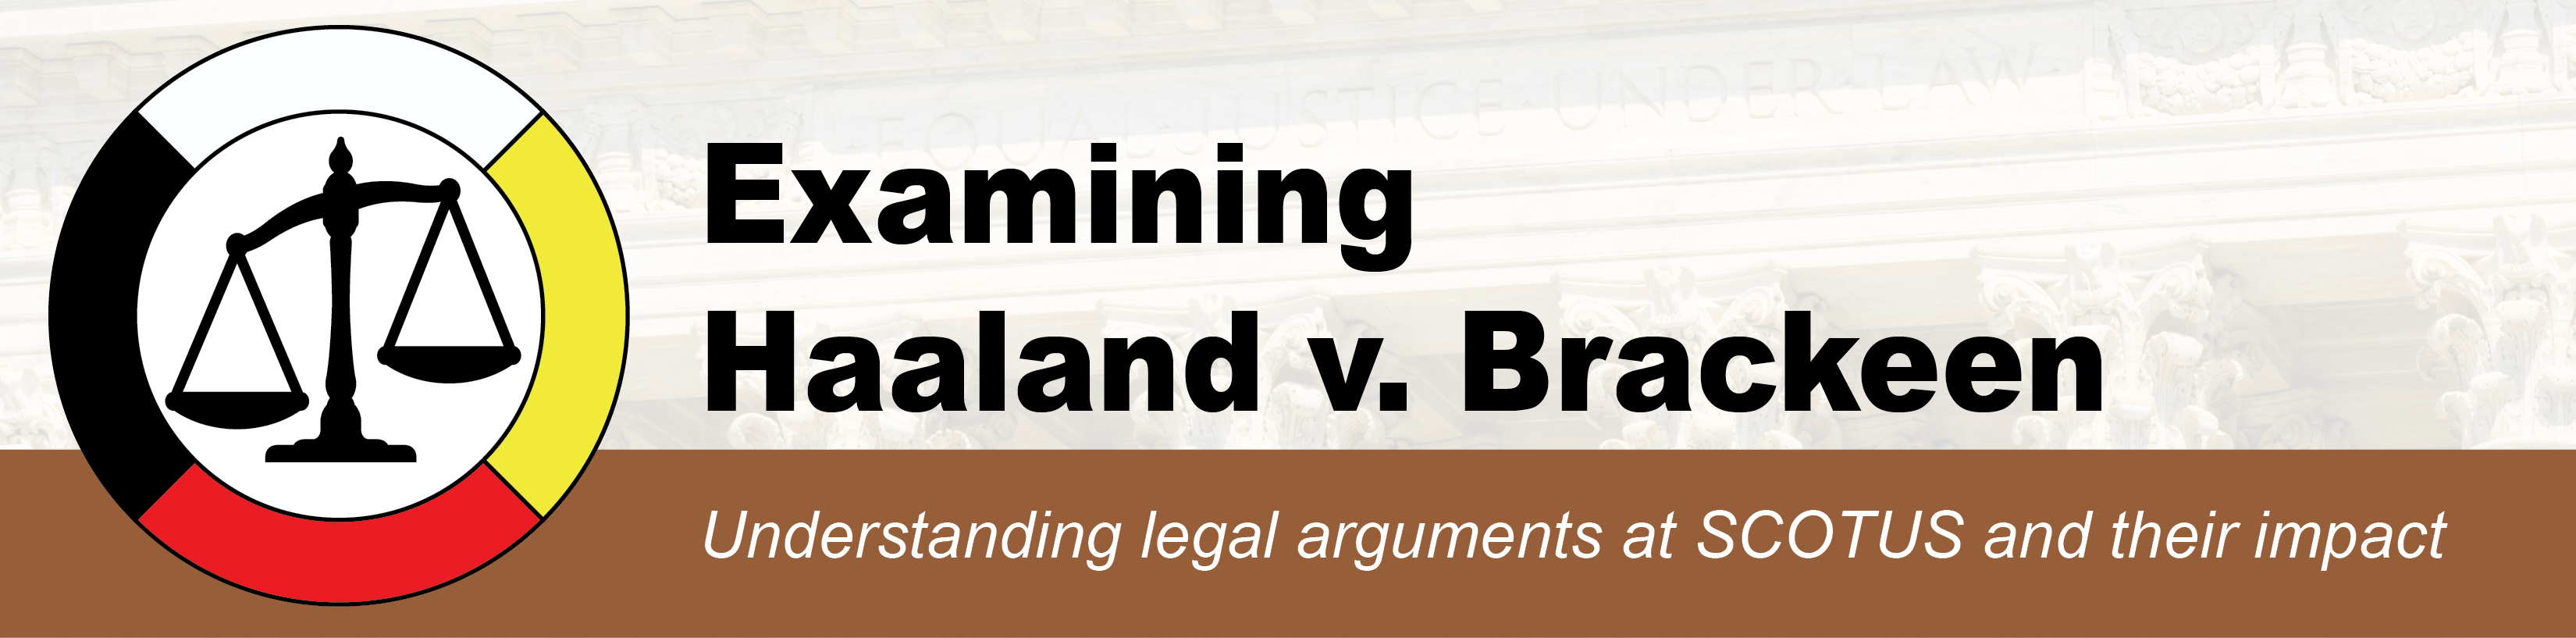 Banner: Examining Haaland v. Brackeen: Understanding legal arguments at SCOTUS and their impact 